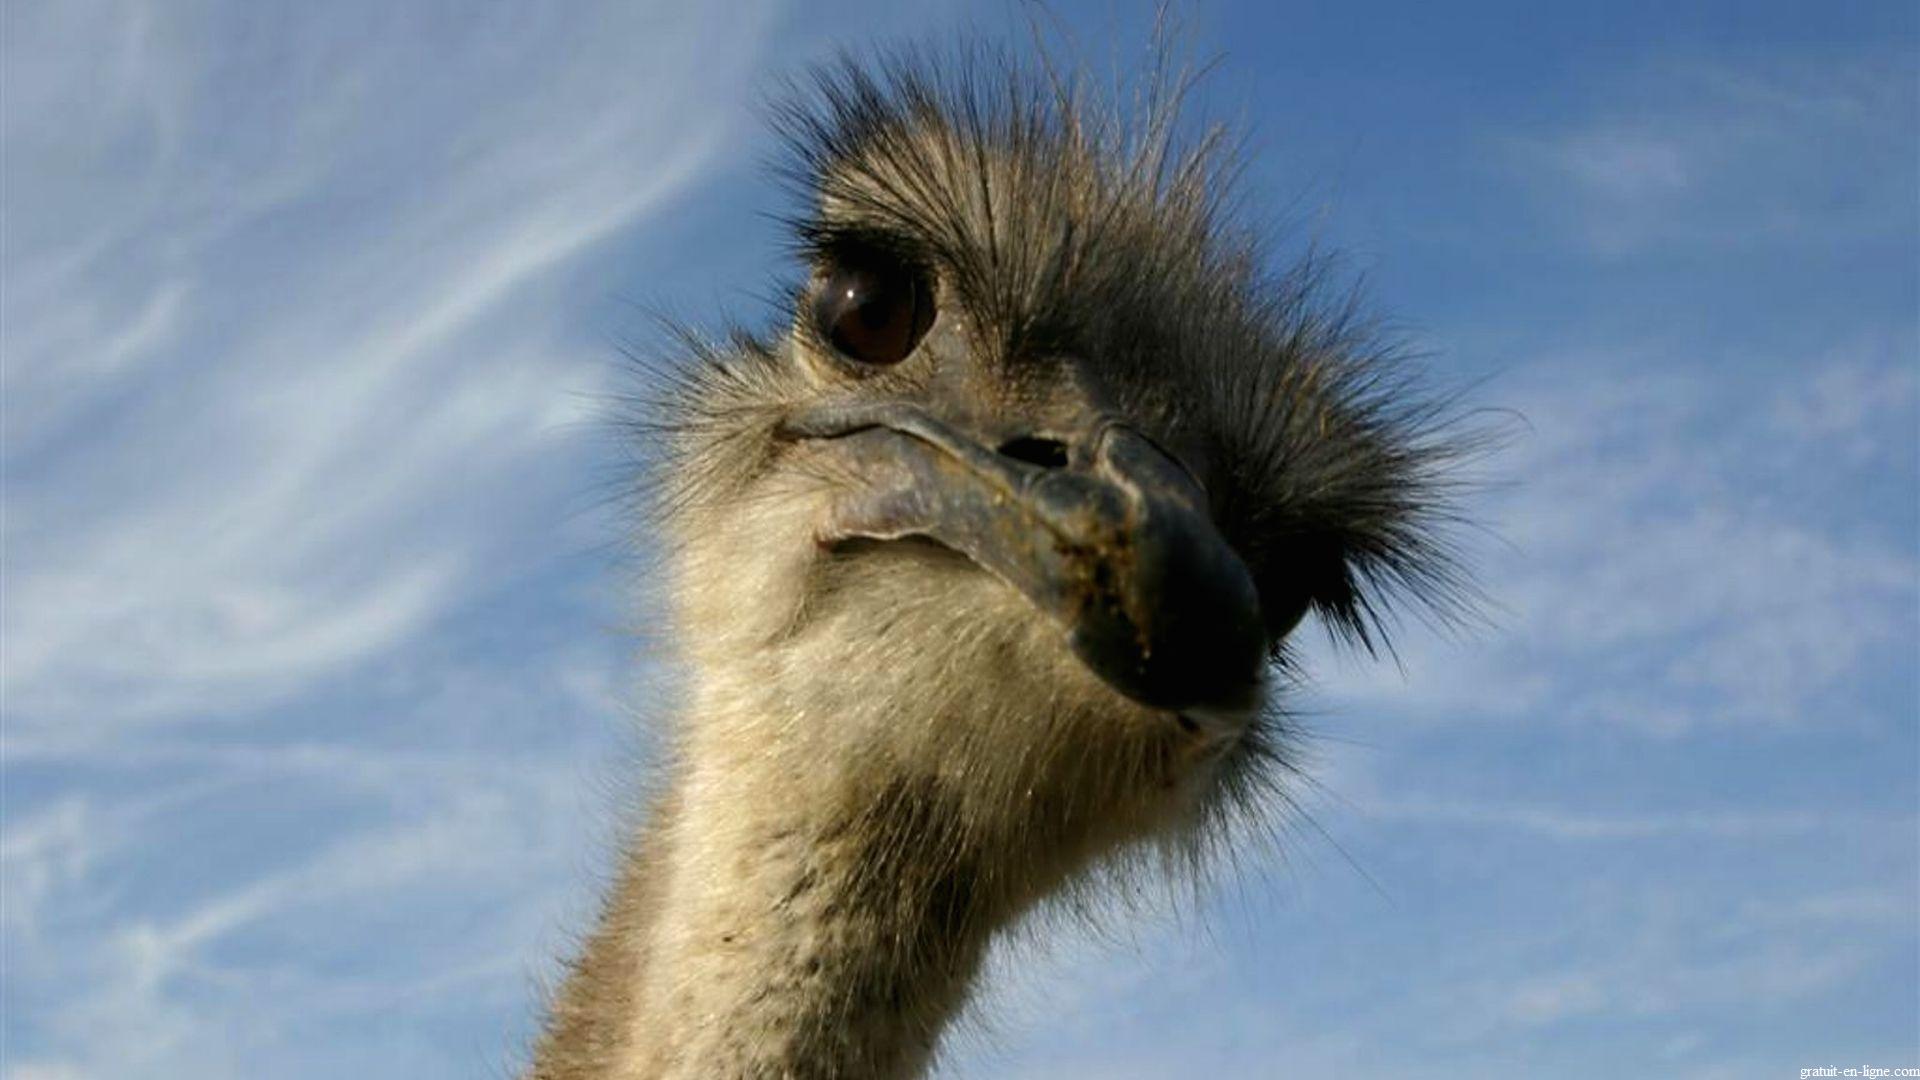 Ostrich Funny Image Quotes. QuotesGram